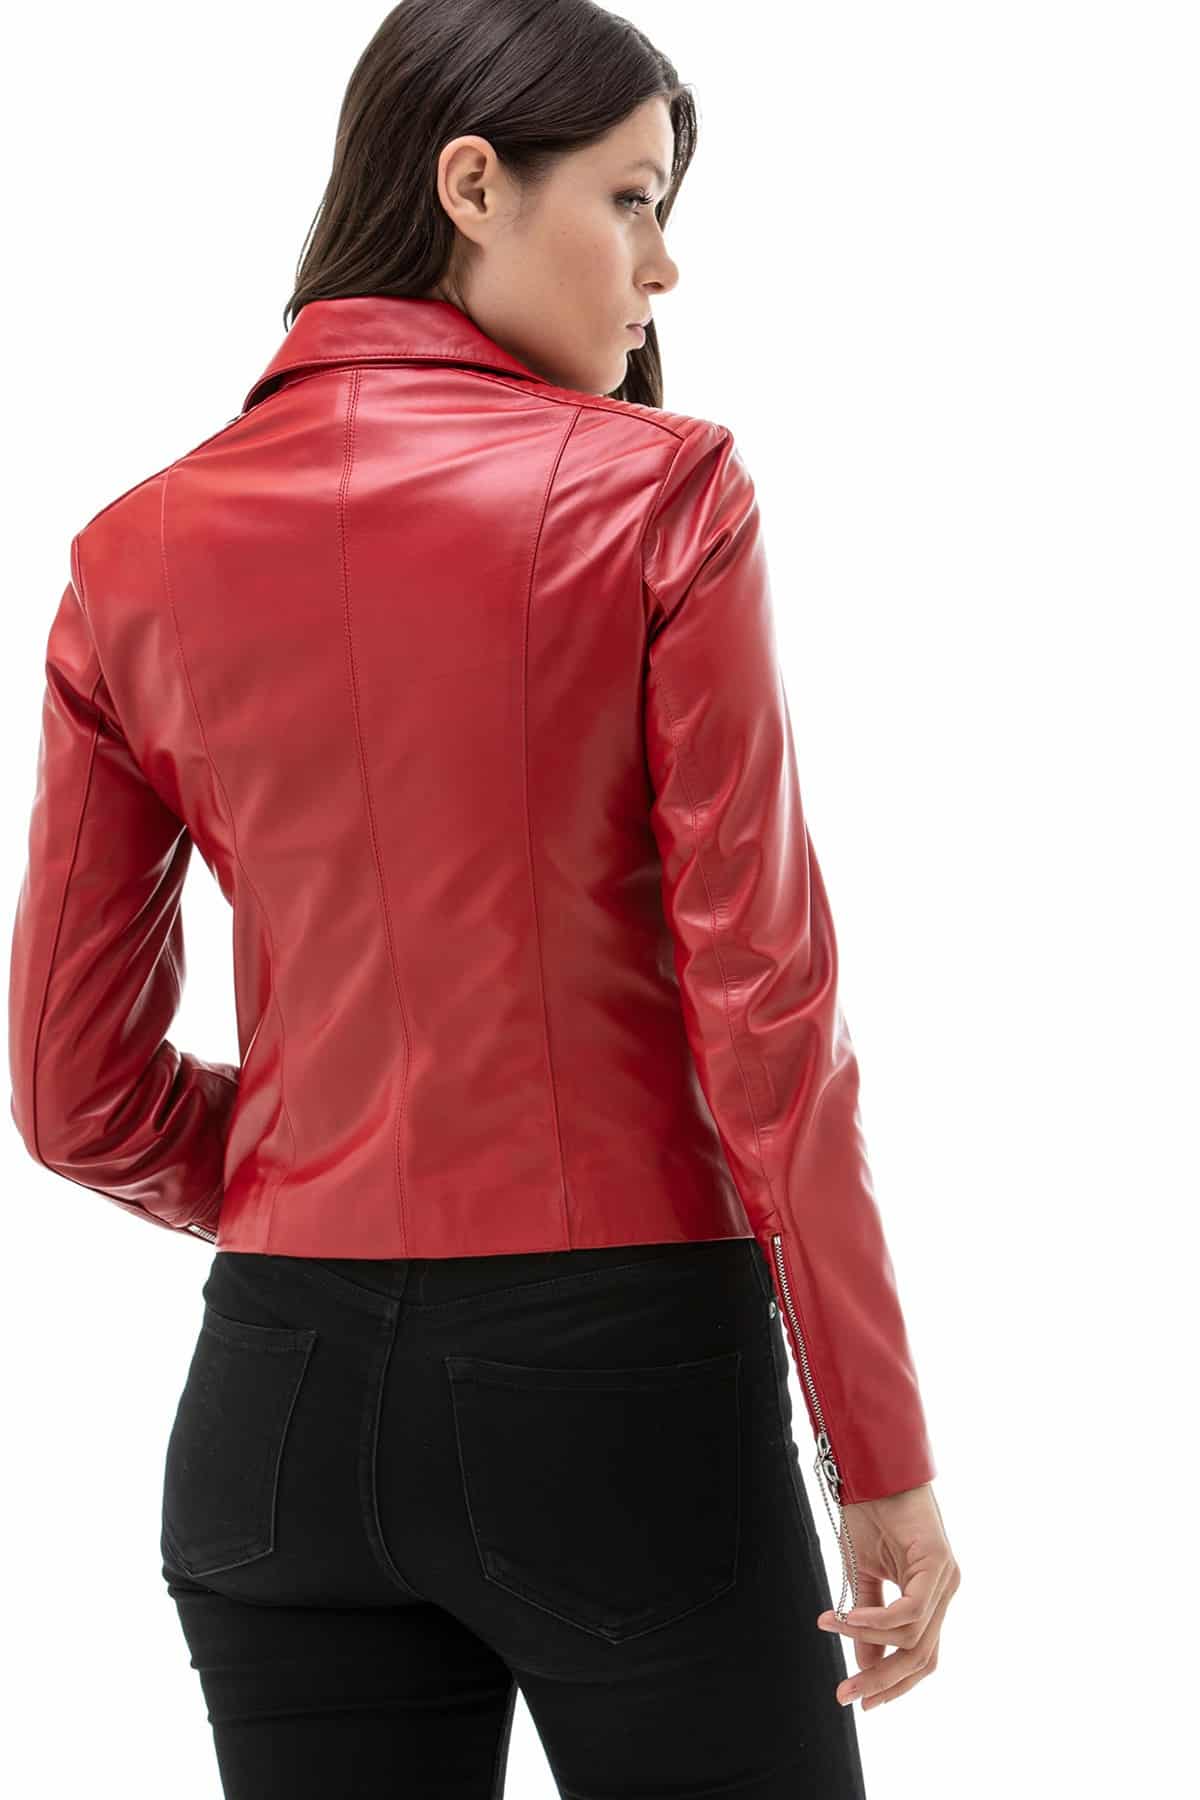 Women's 100 % Real Red Leather Biker Jacket